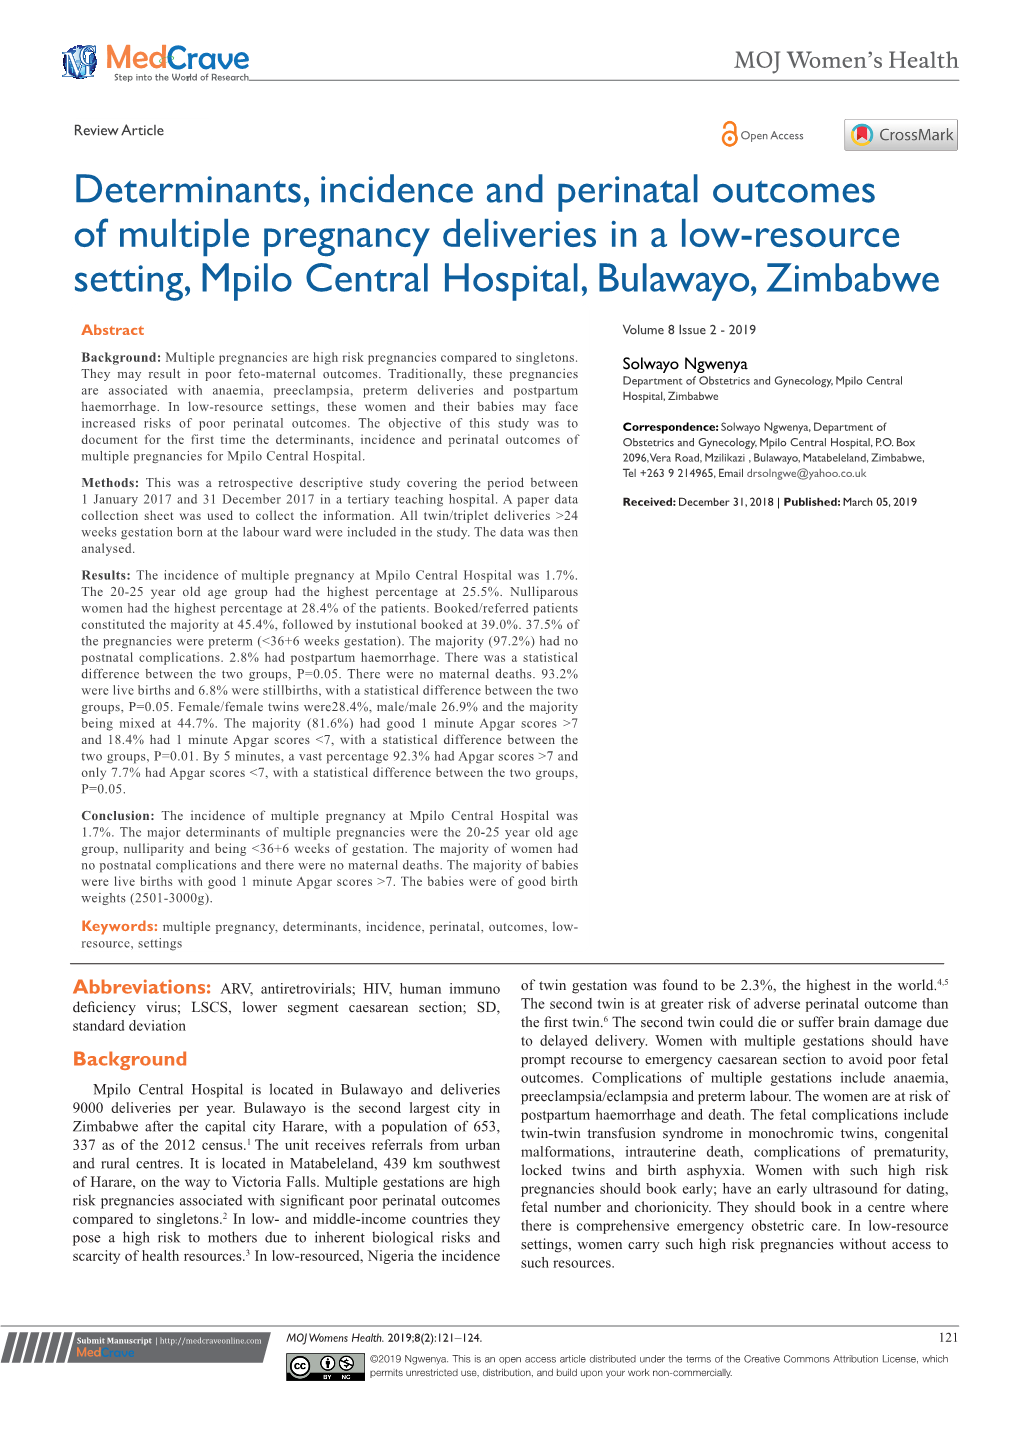 Determinants, Incidence and Perinatal Outcomes of Multiple Pregnancy Deliveries in a Low-Resource Setting, Mpilo Central Hospital, Bulawayo, Zimbabwe